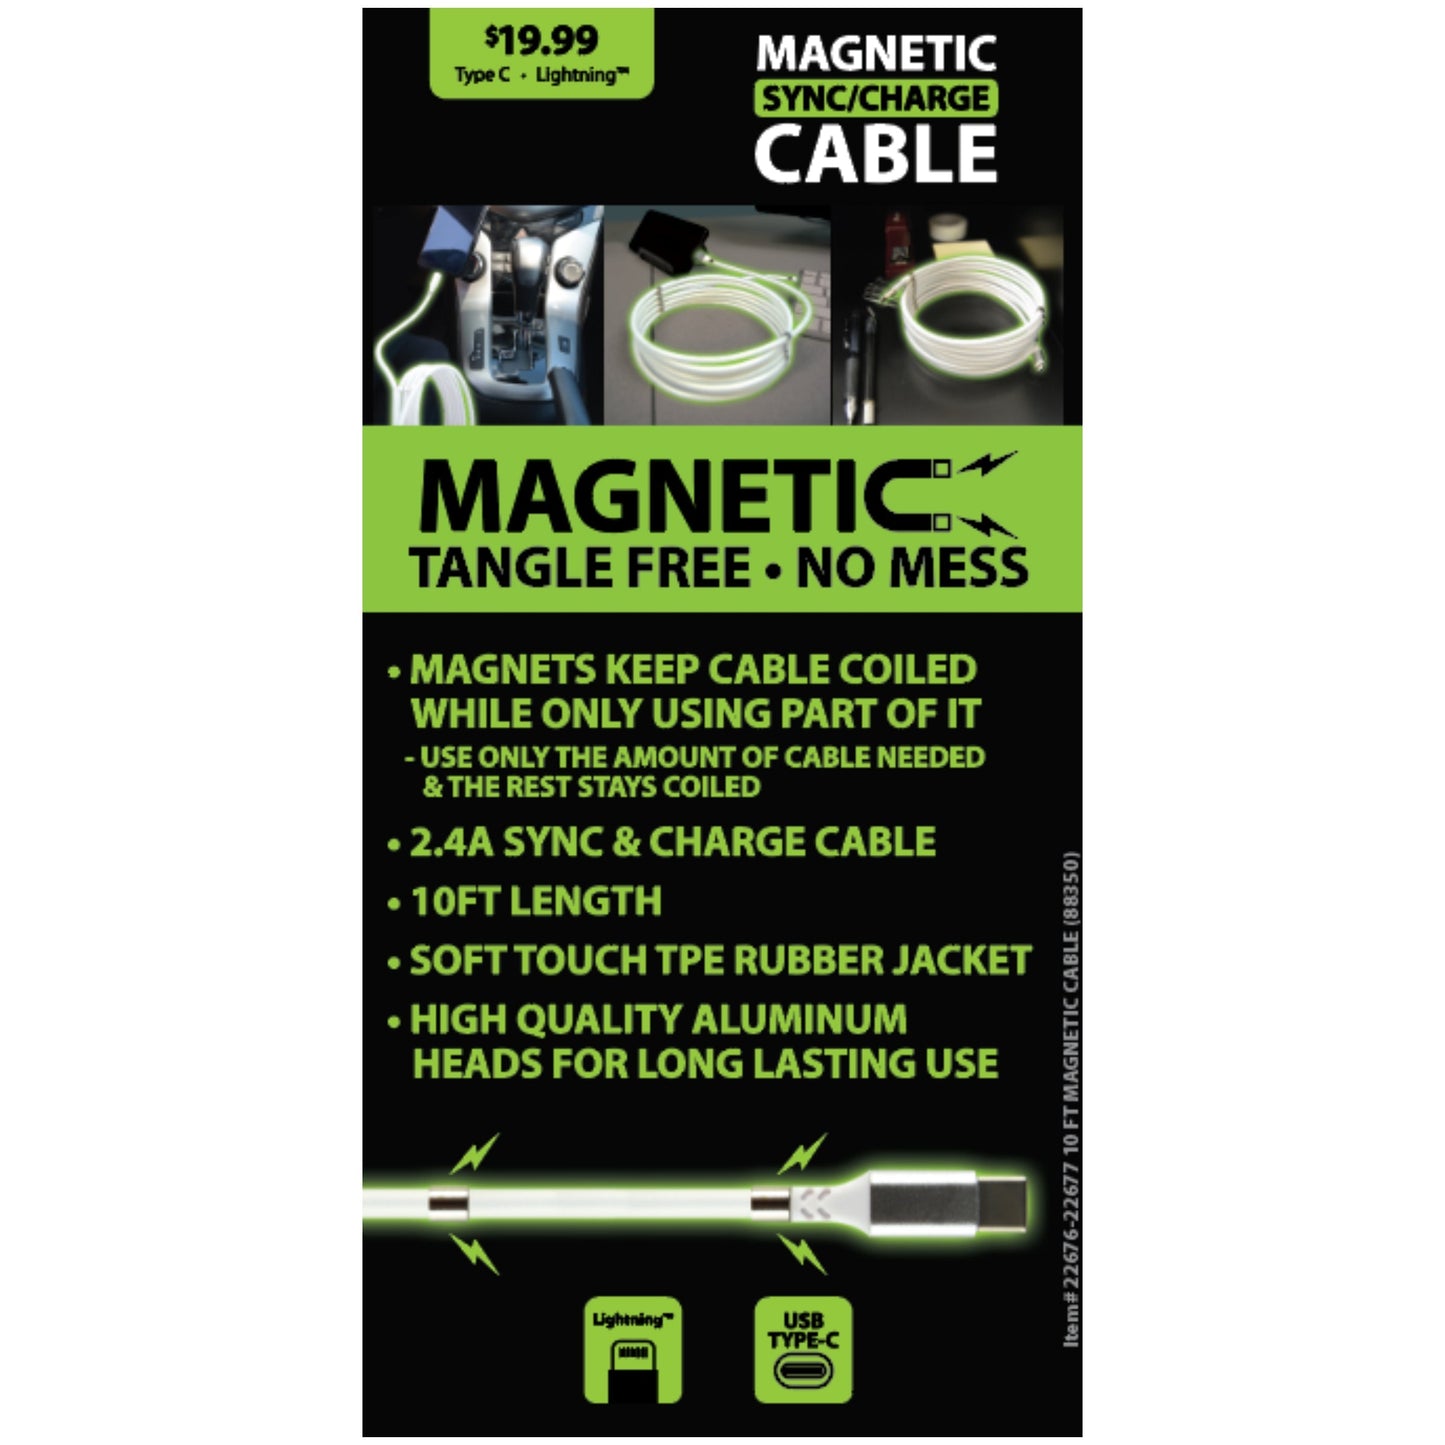 ITEM NUMBER 088350 10FT MAGNETIC CABLE VARIETY 6 PIECES PER PACK